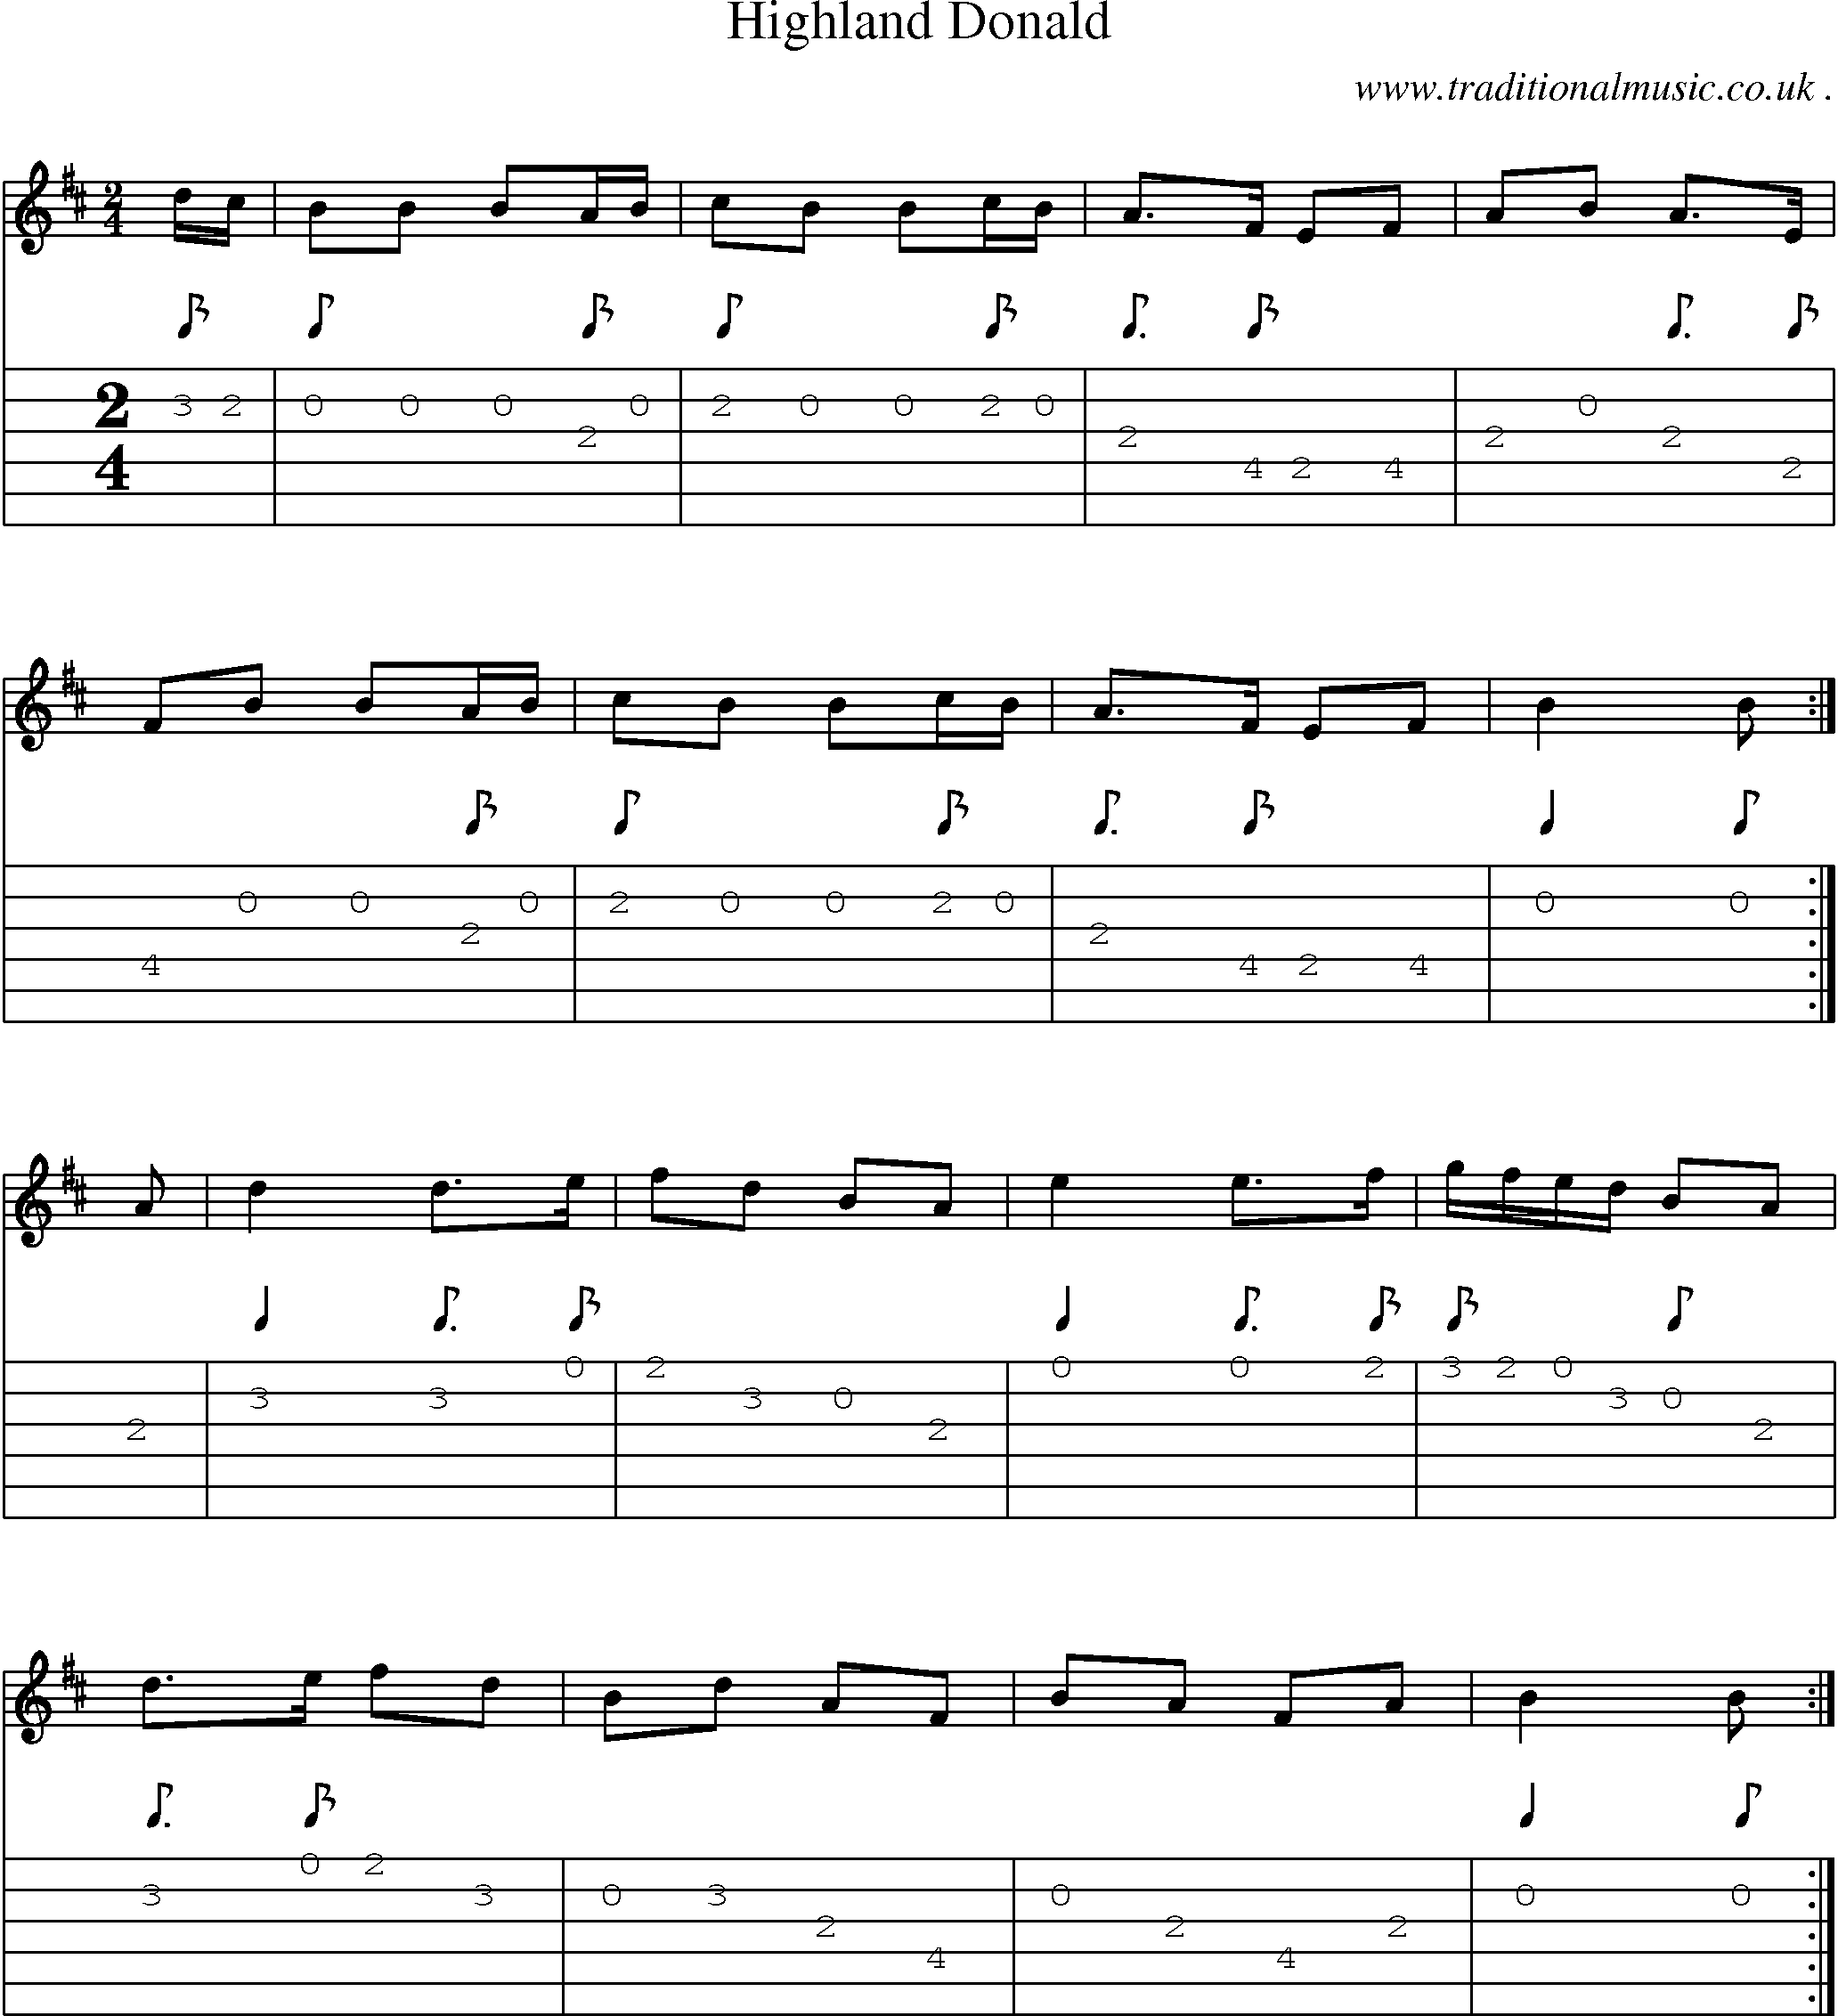 Sheet-music  score, Chords and Guitar Tabs for Highland Donald